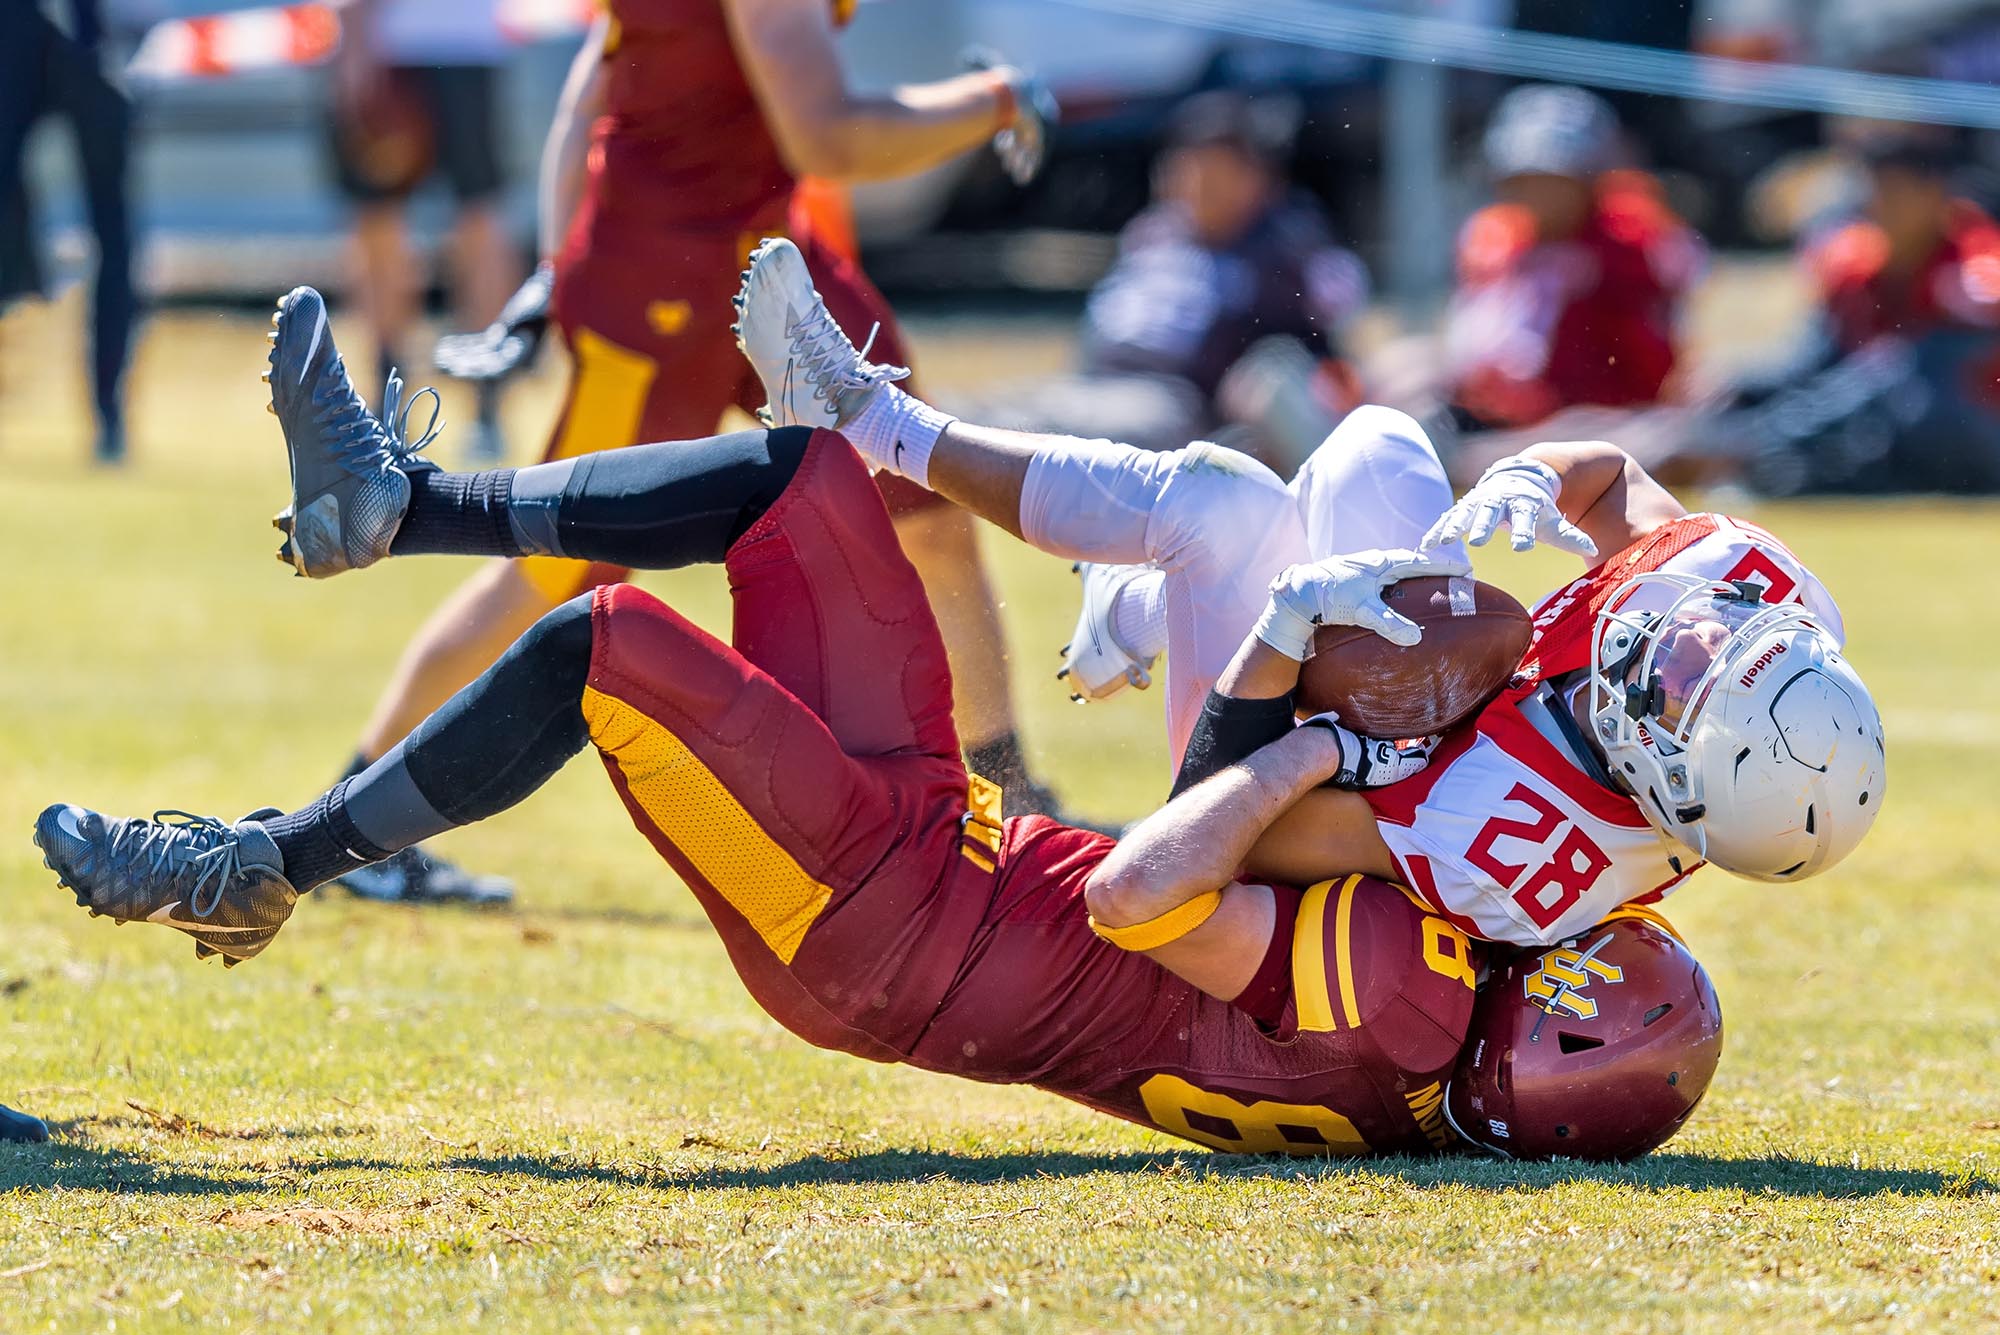 Photo: A person wearing a burgundy and yellow tackle football uniform and helmet is shown tackling a player in a white and red uniform and helmet tot he ground. The burgundy athlete has their head impacted to the ground as the white player falls on top of them.